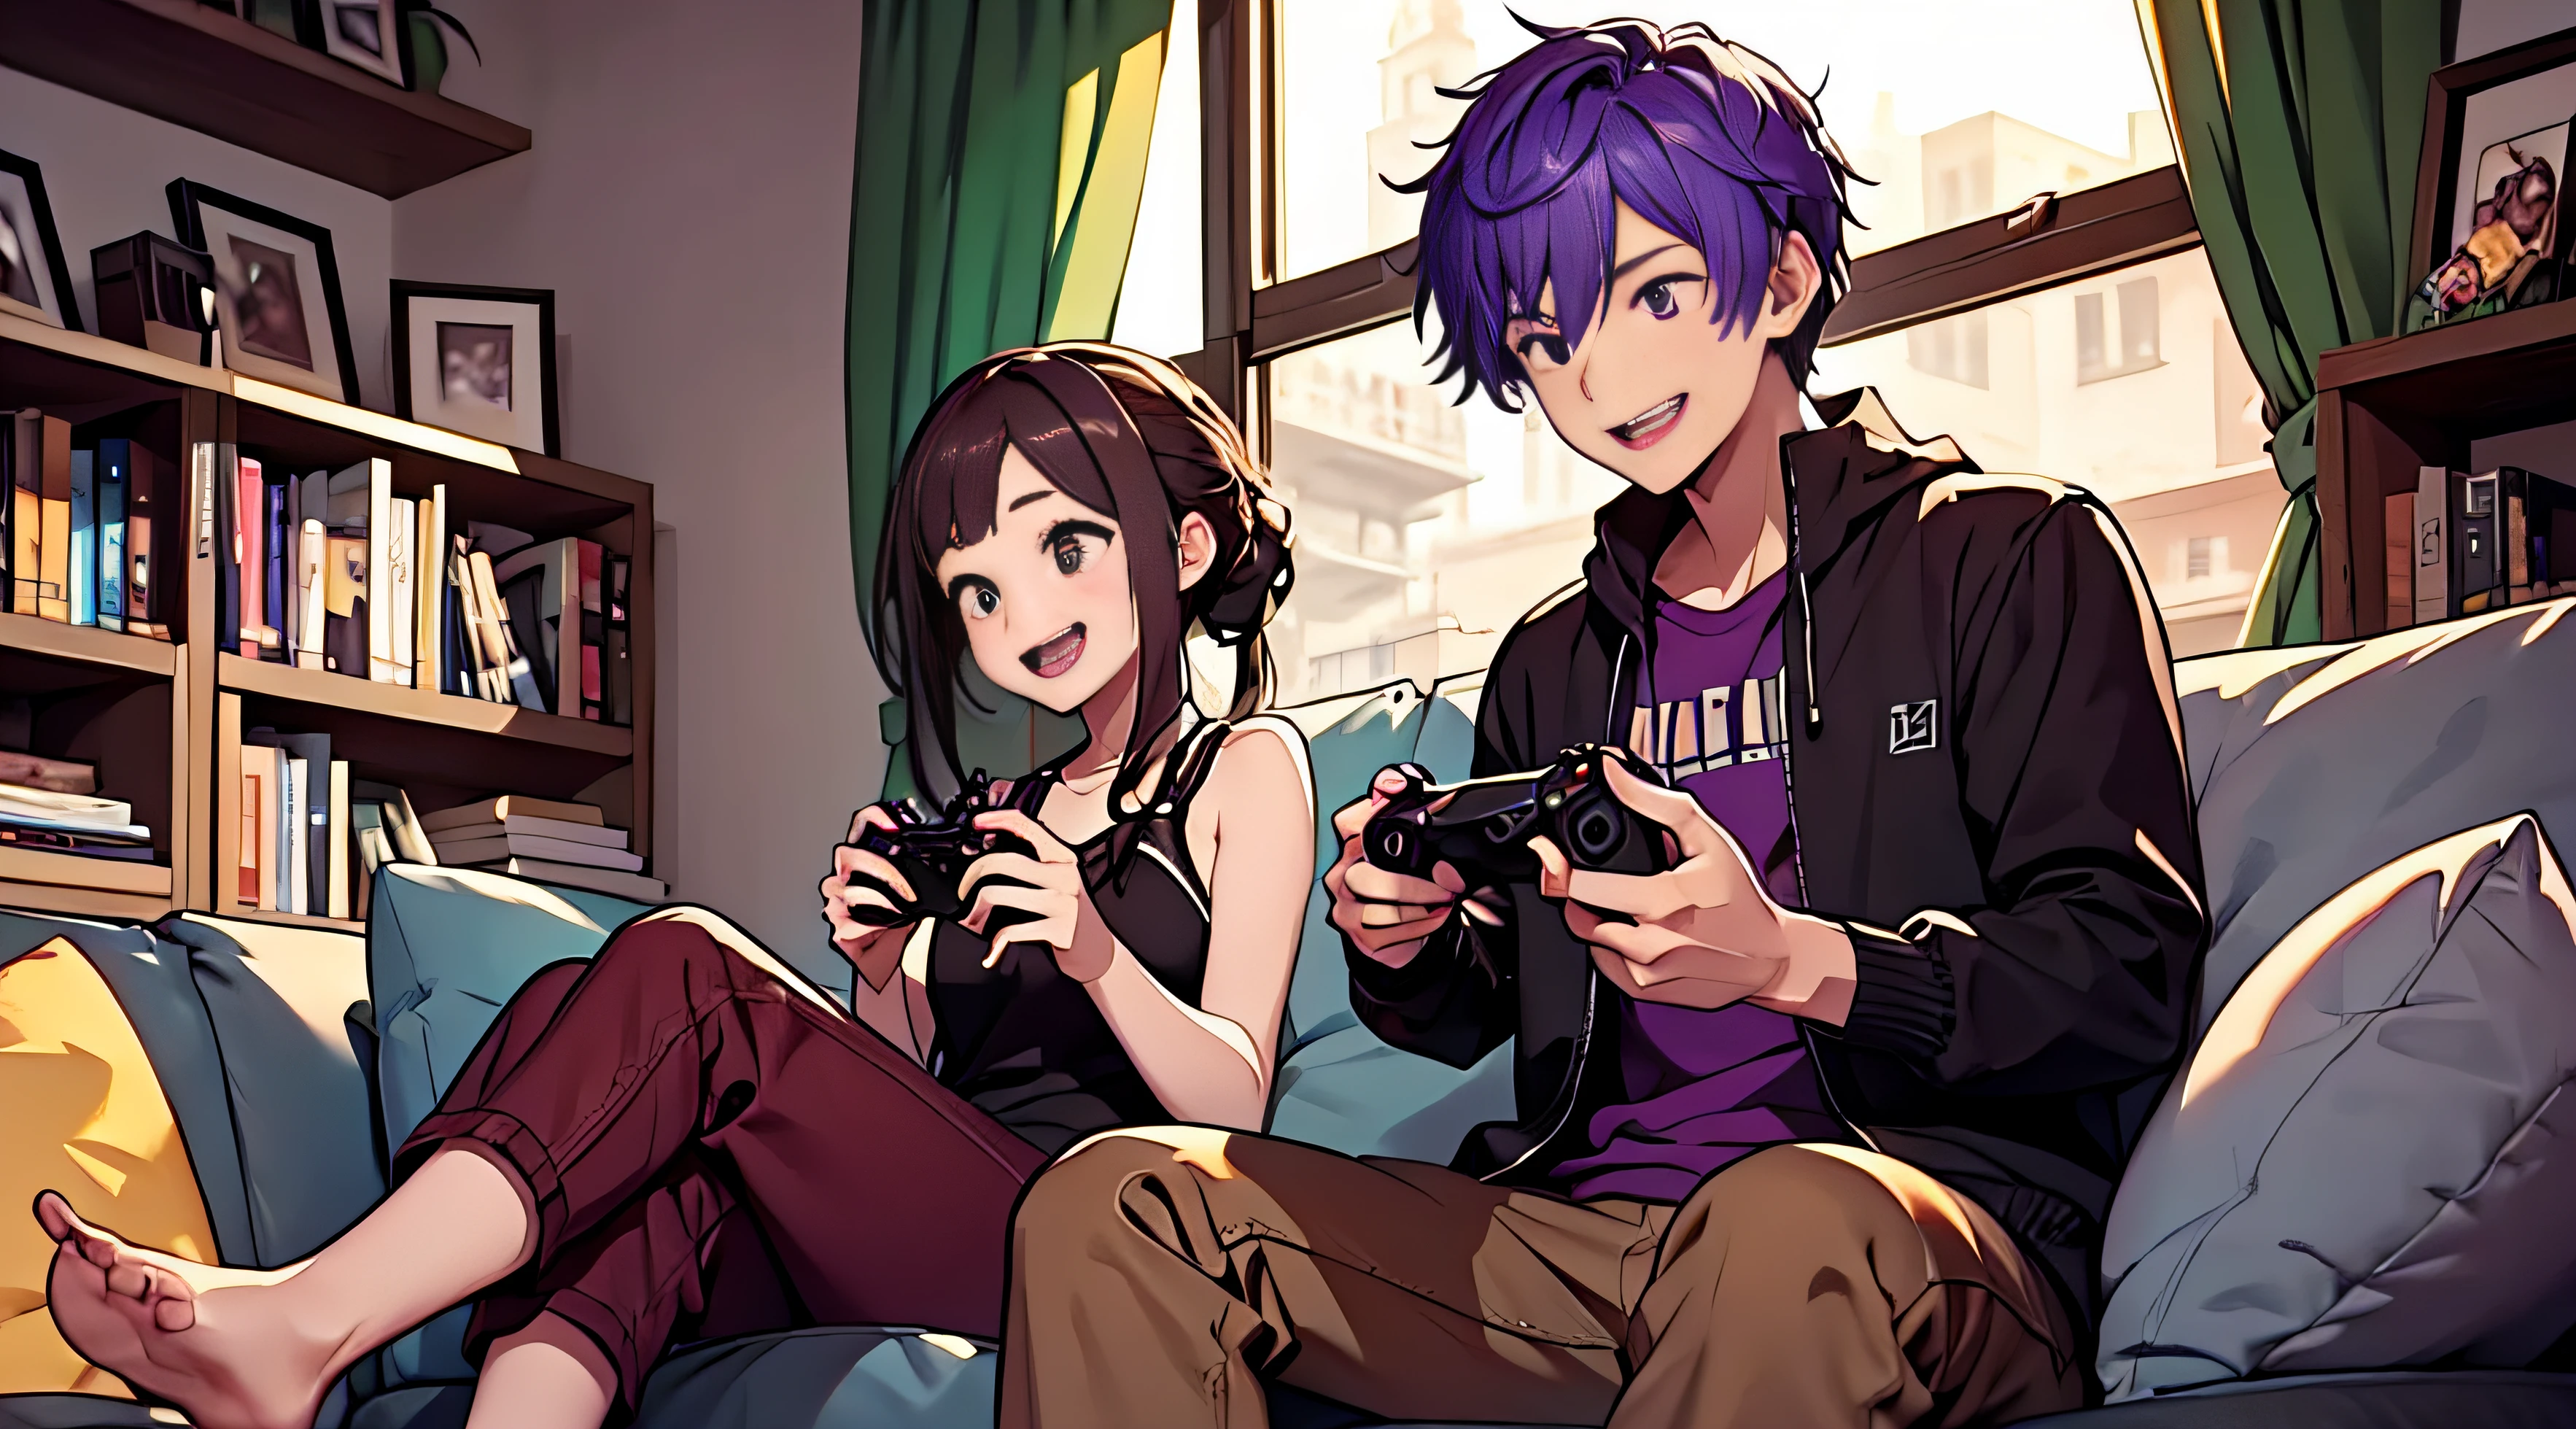 Purple Hair Boy And Brown Hair Girl、a couple、great laughter、Video games together、sofas、DVR、relax vibe、high-level image quality、A delightful、controller、Playing